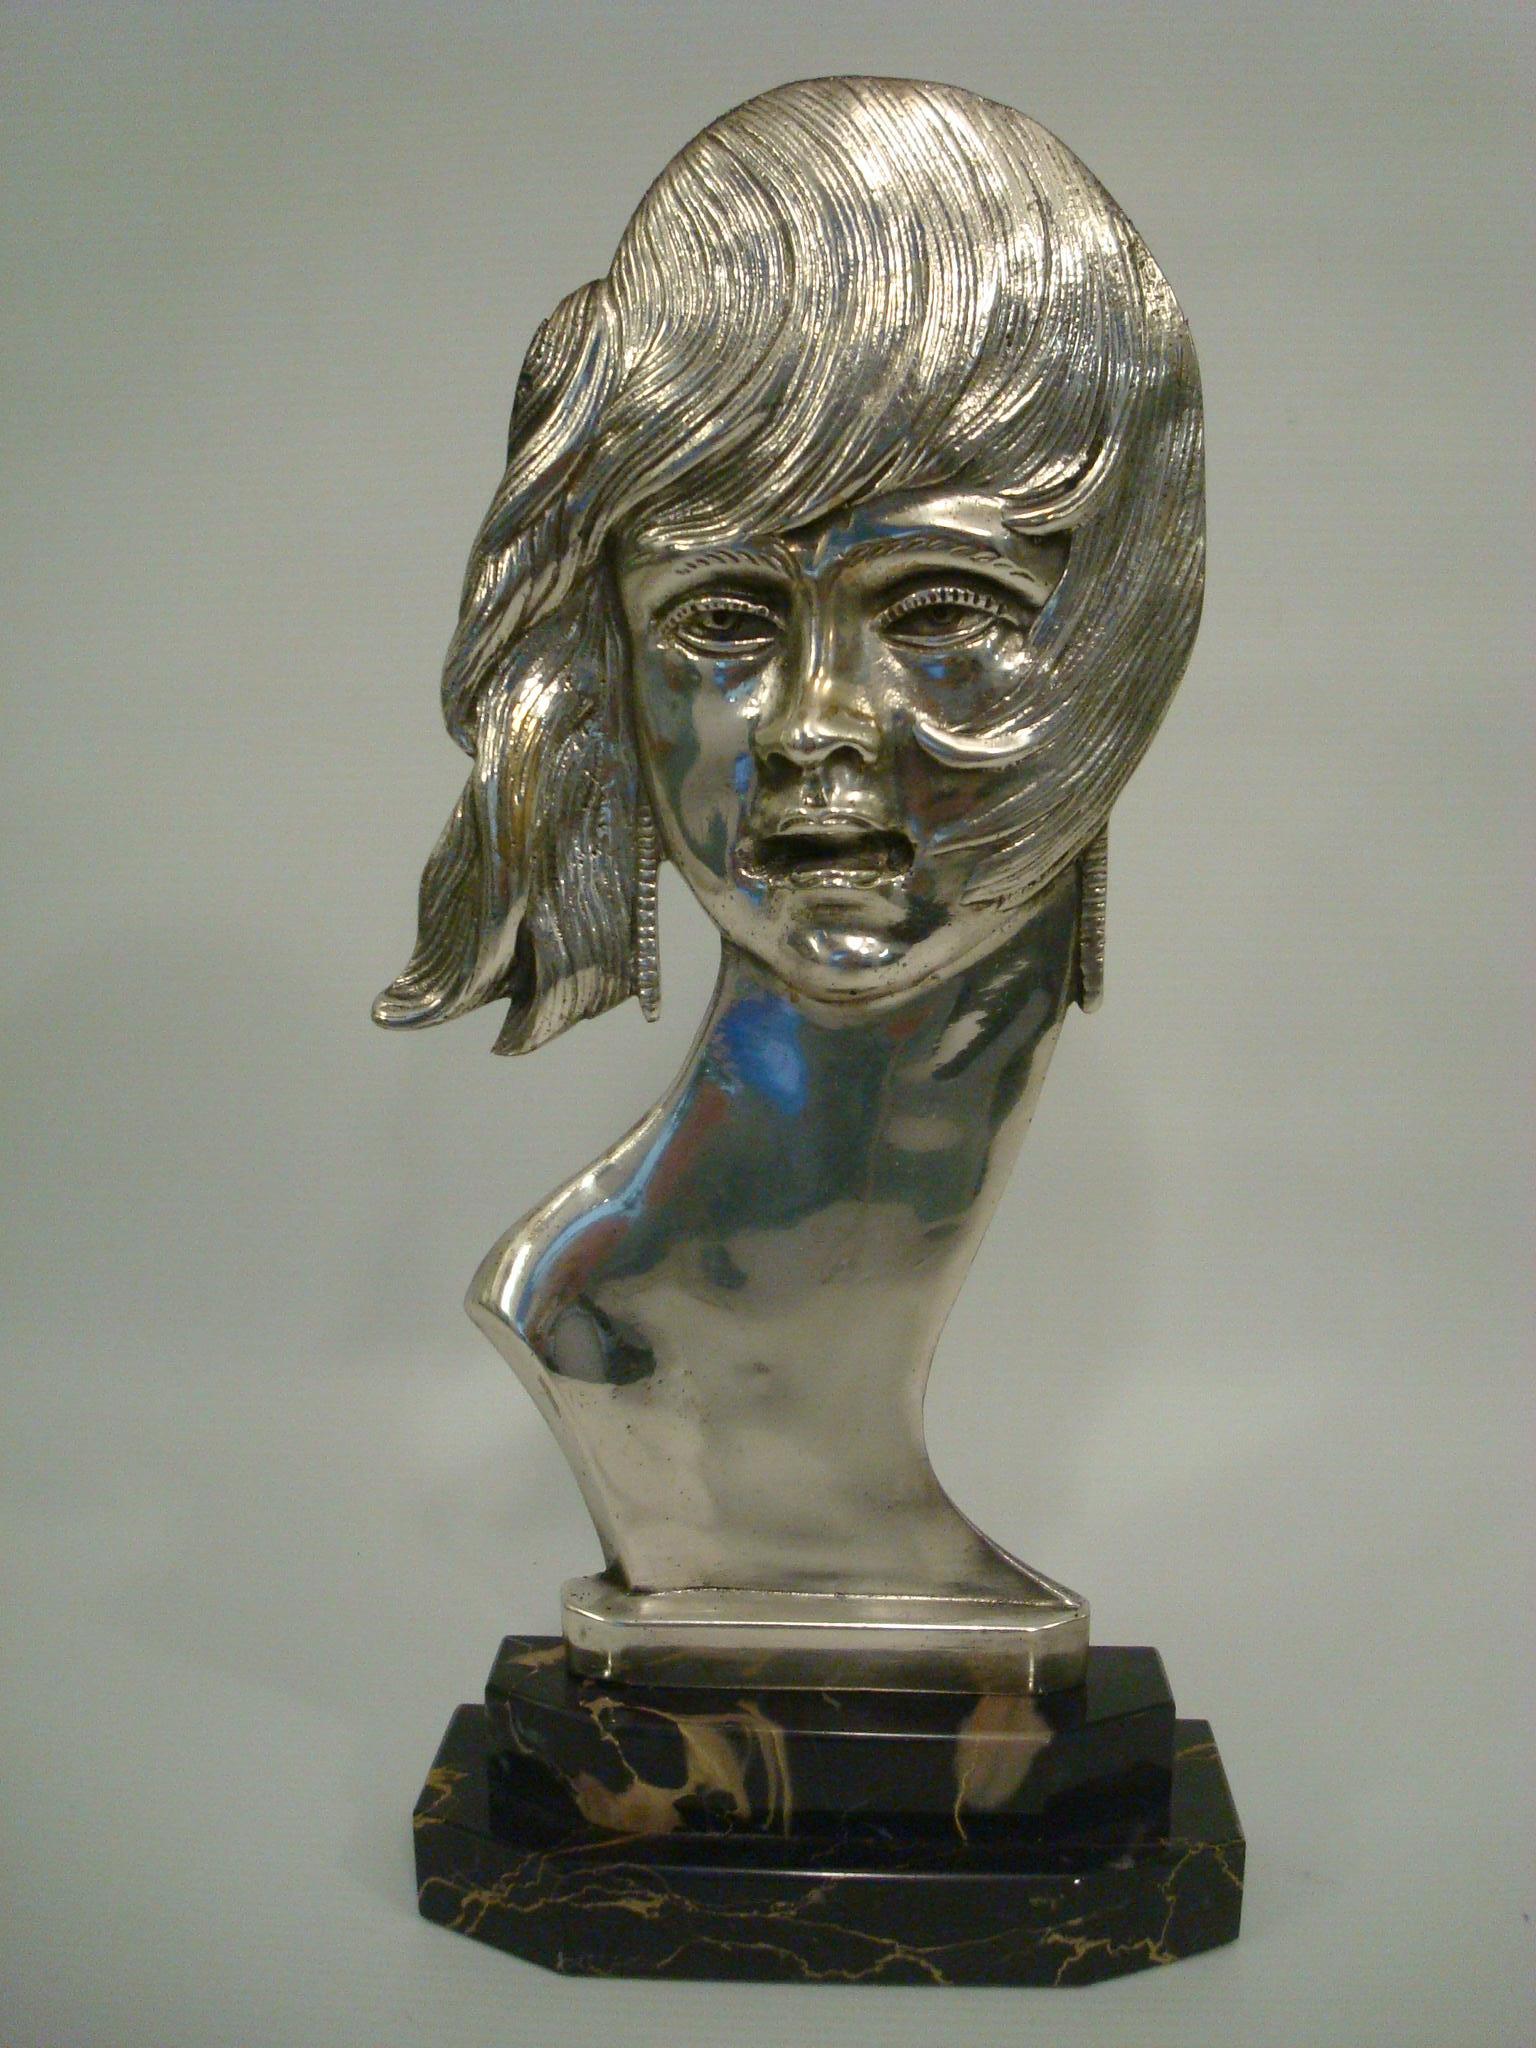 Art Deco bust of a woman. Silvered bronze sculpture of a lady.
Mounted over a Italian marble base. France 1930's.
Perfect desk piece or paperweight.